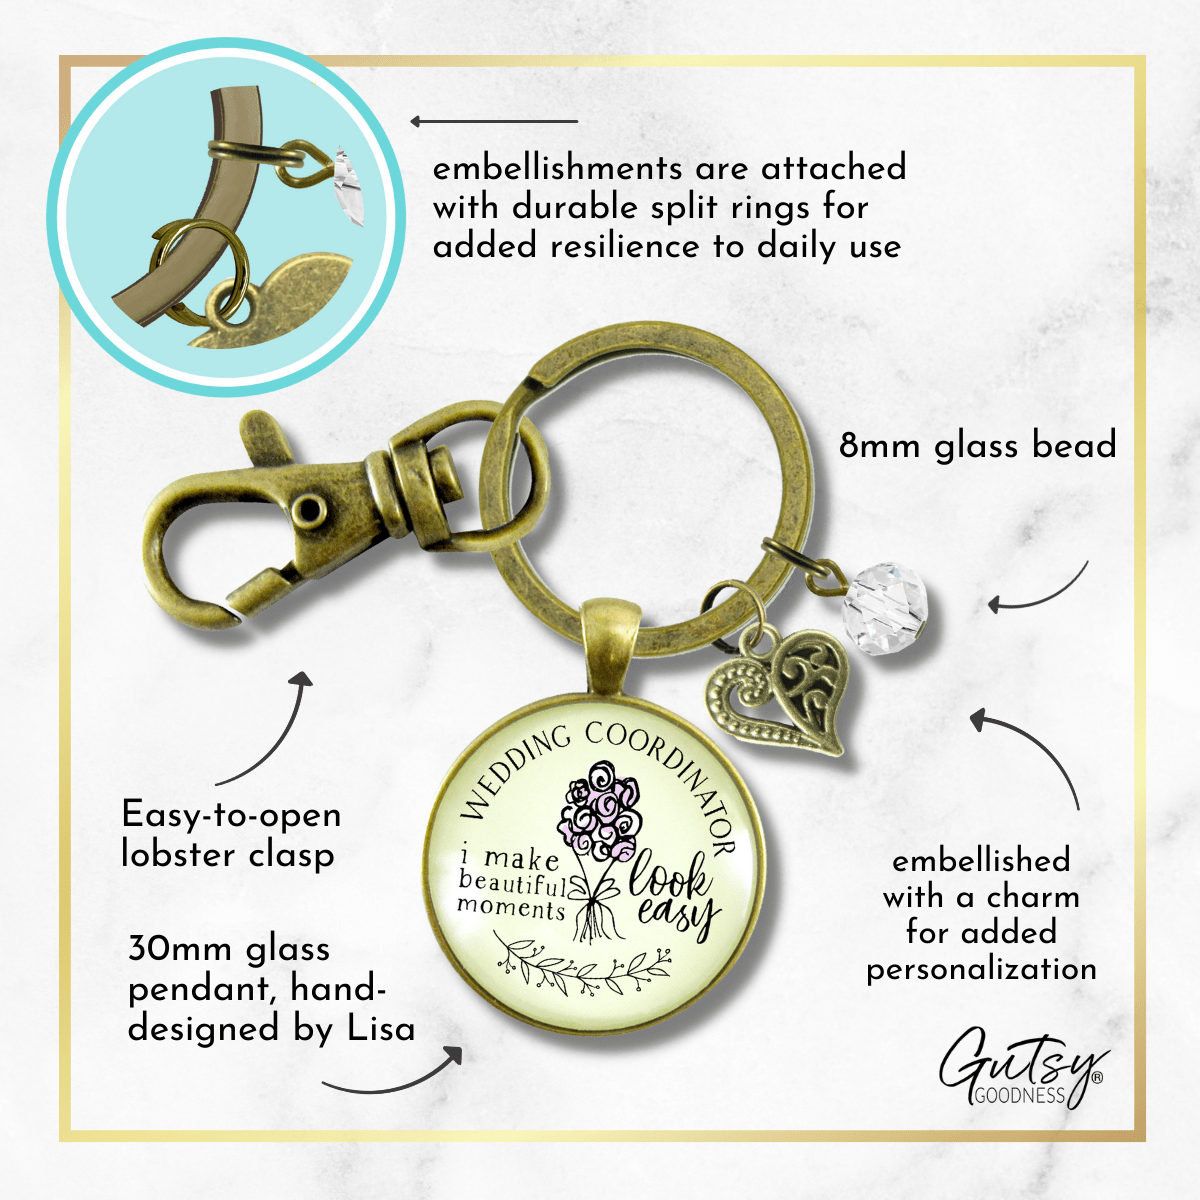 Wedding Coordinator Keychain I Make Beautiful Moments Thank You Gift To Planner From Bride Groom - Gutsy Goodness